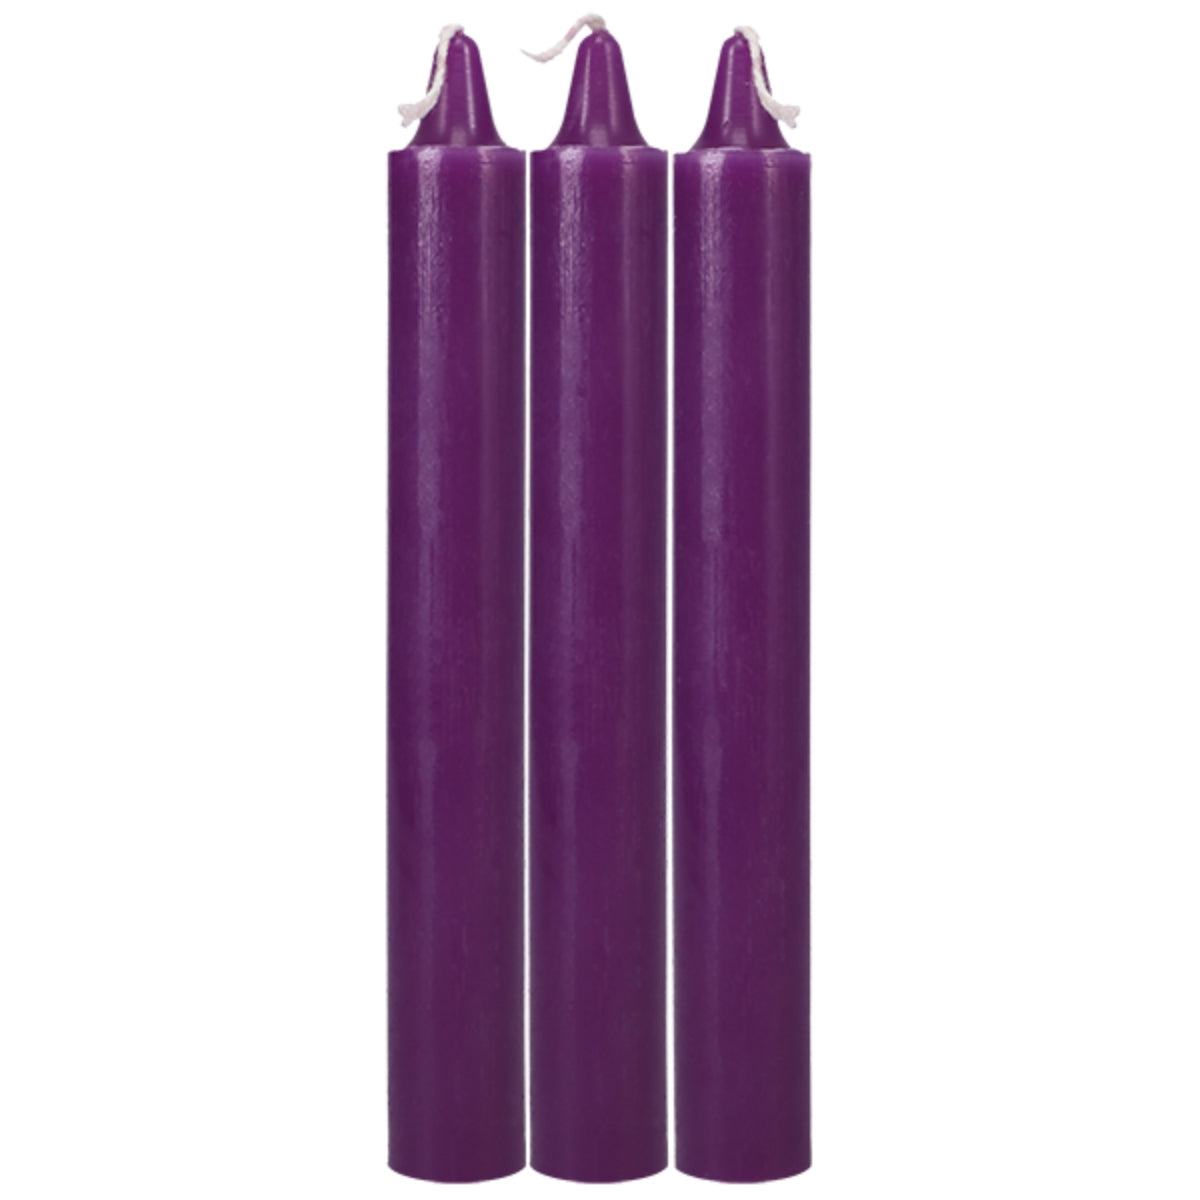 Electro Medical Japanese Drip Candles - 3 Pack Purple   